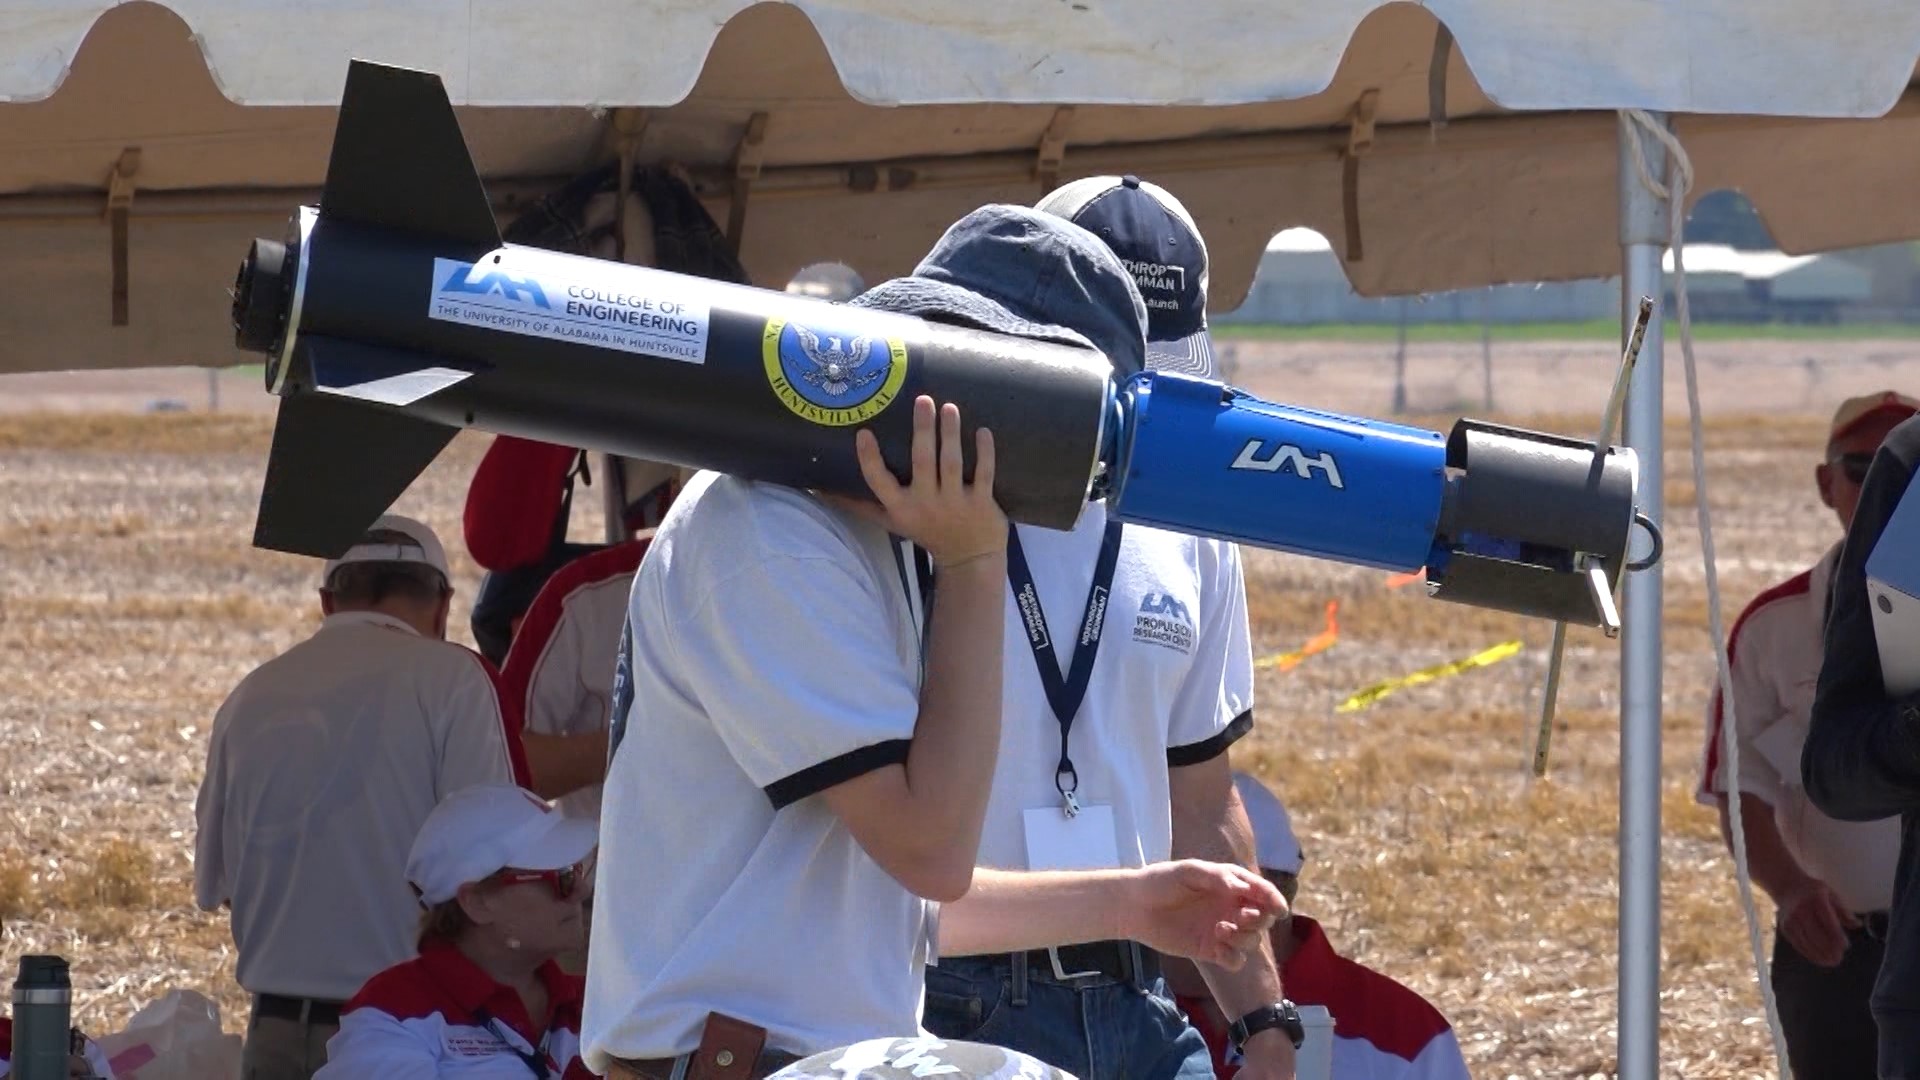 Saturday was launch day for hundreds of student teams competing in NASA's Rocket Fair, with results expected in June.